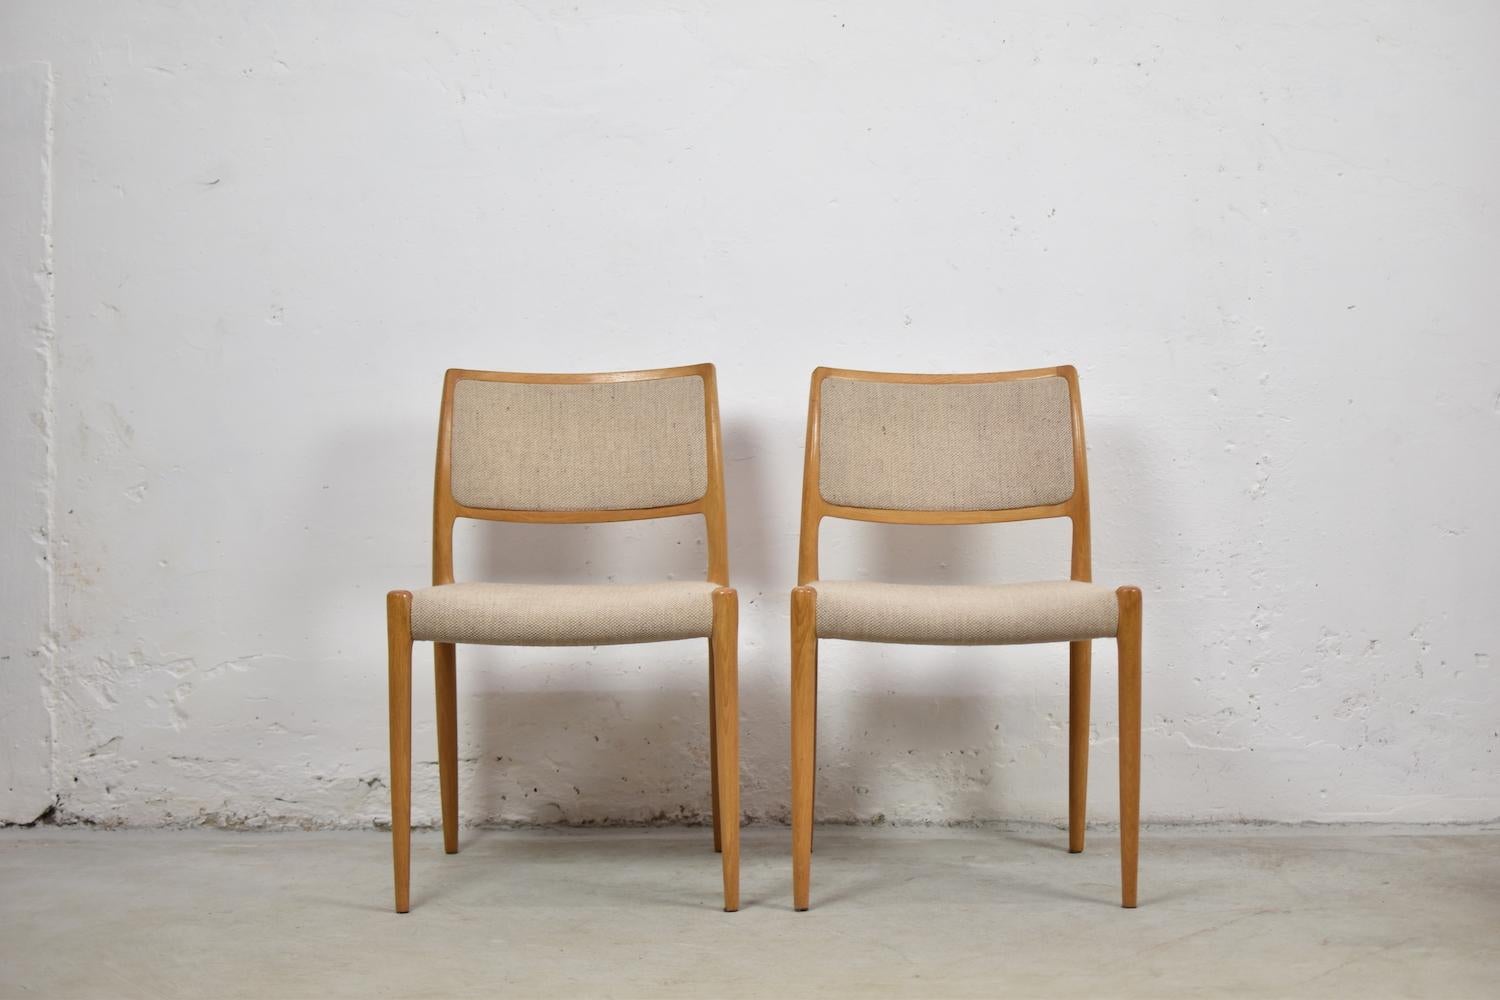 Great set of four ‘model 80’ chairs by Niels Otto Møller for J.L.Møllers Mobelfabrik Denmark, 1950s. This set is made out of solid oak with its original woven fabric seats. These chairs are in very good condition with minor wear consistent with age